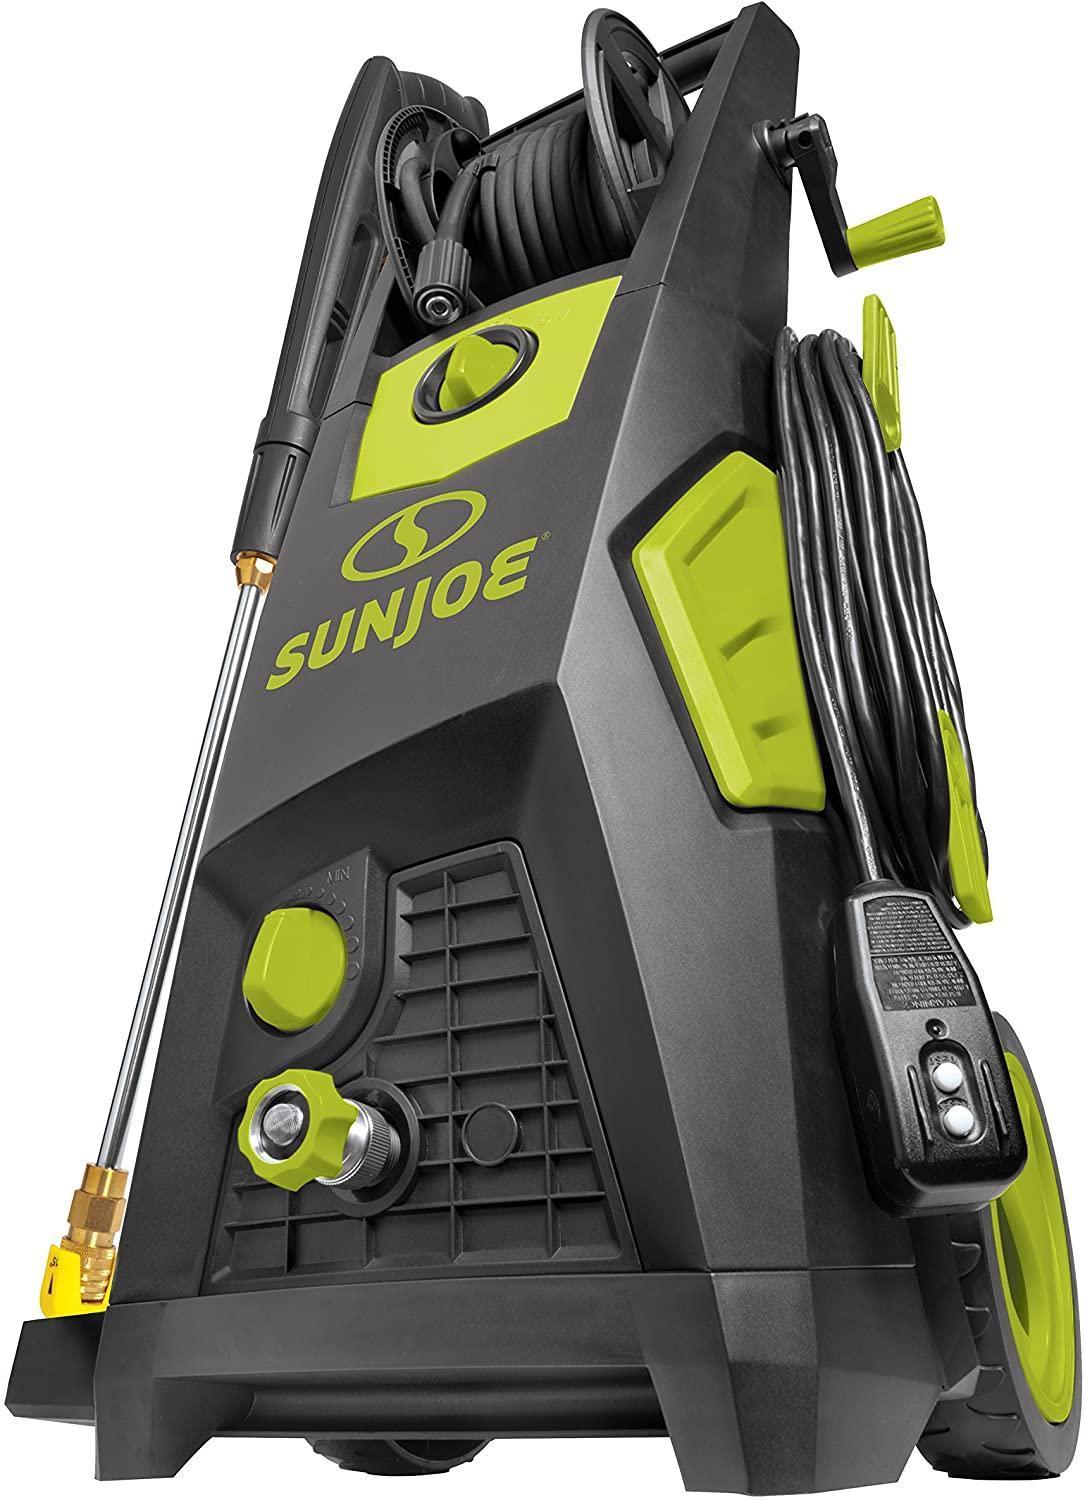 Sun Joe 2300-PSI 1.48 GPM Brushless Induction Electric Pressure Washer